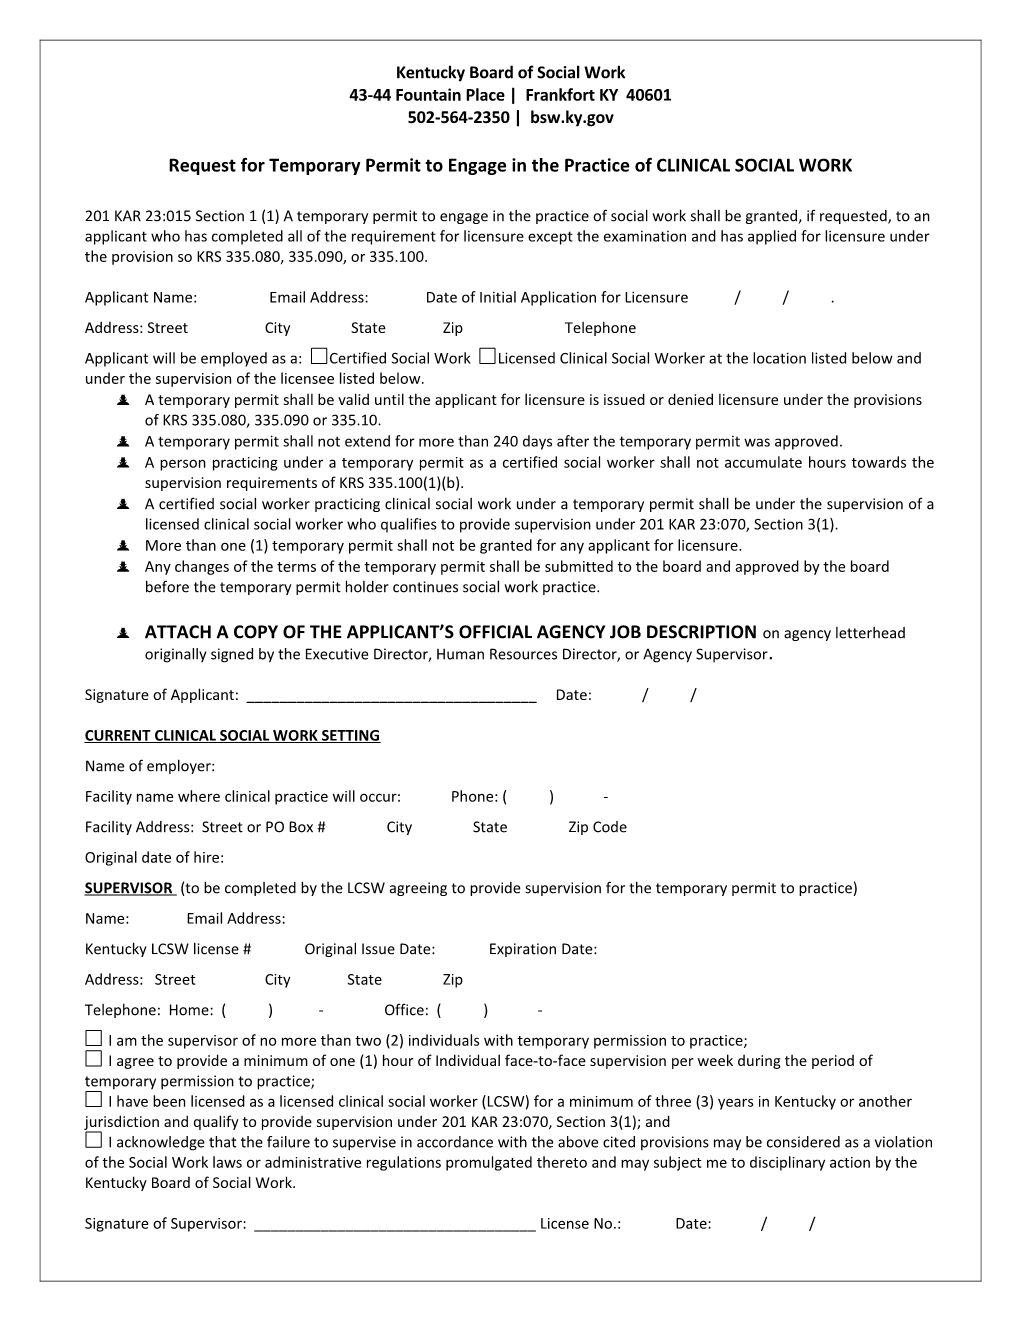 Request for Temporary Permit to Practice Clinical Social Work